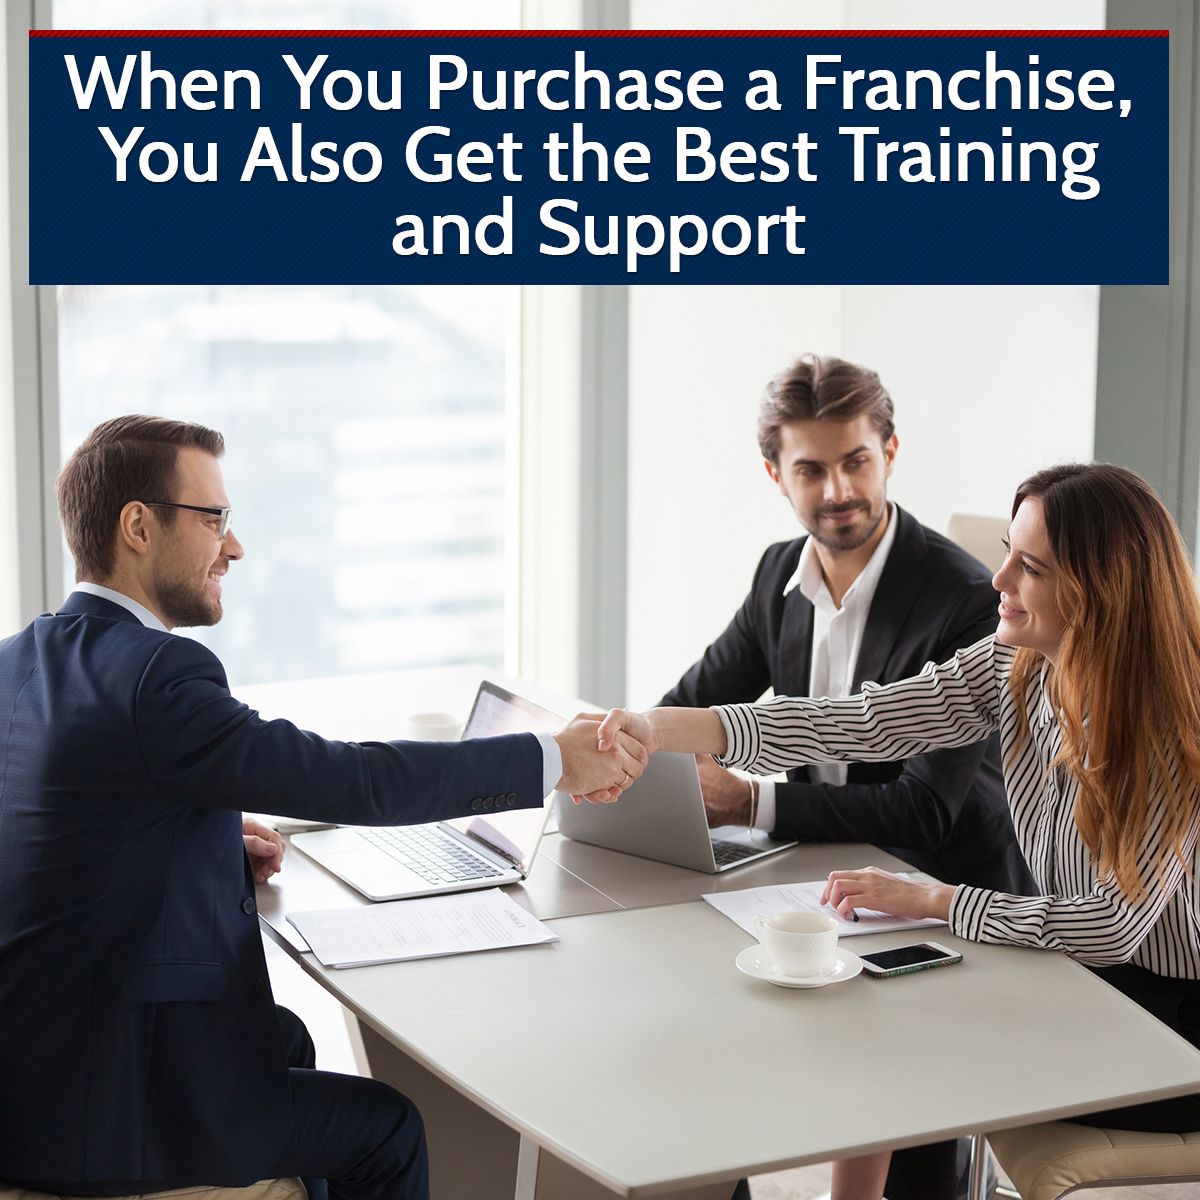 When You Purchase a Franchise, You Also Get the Best Training and Support